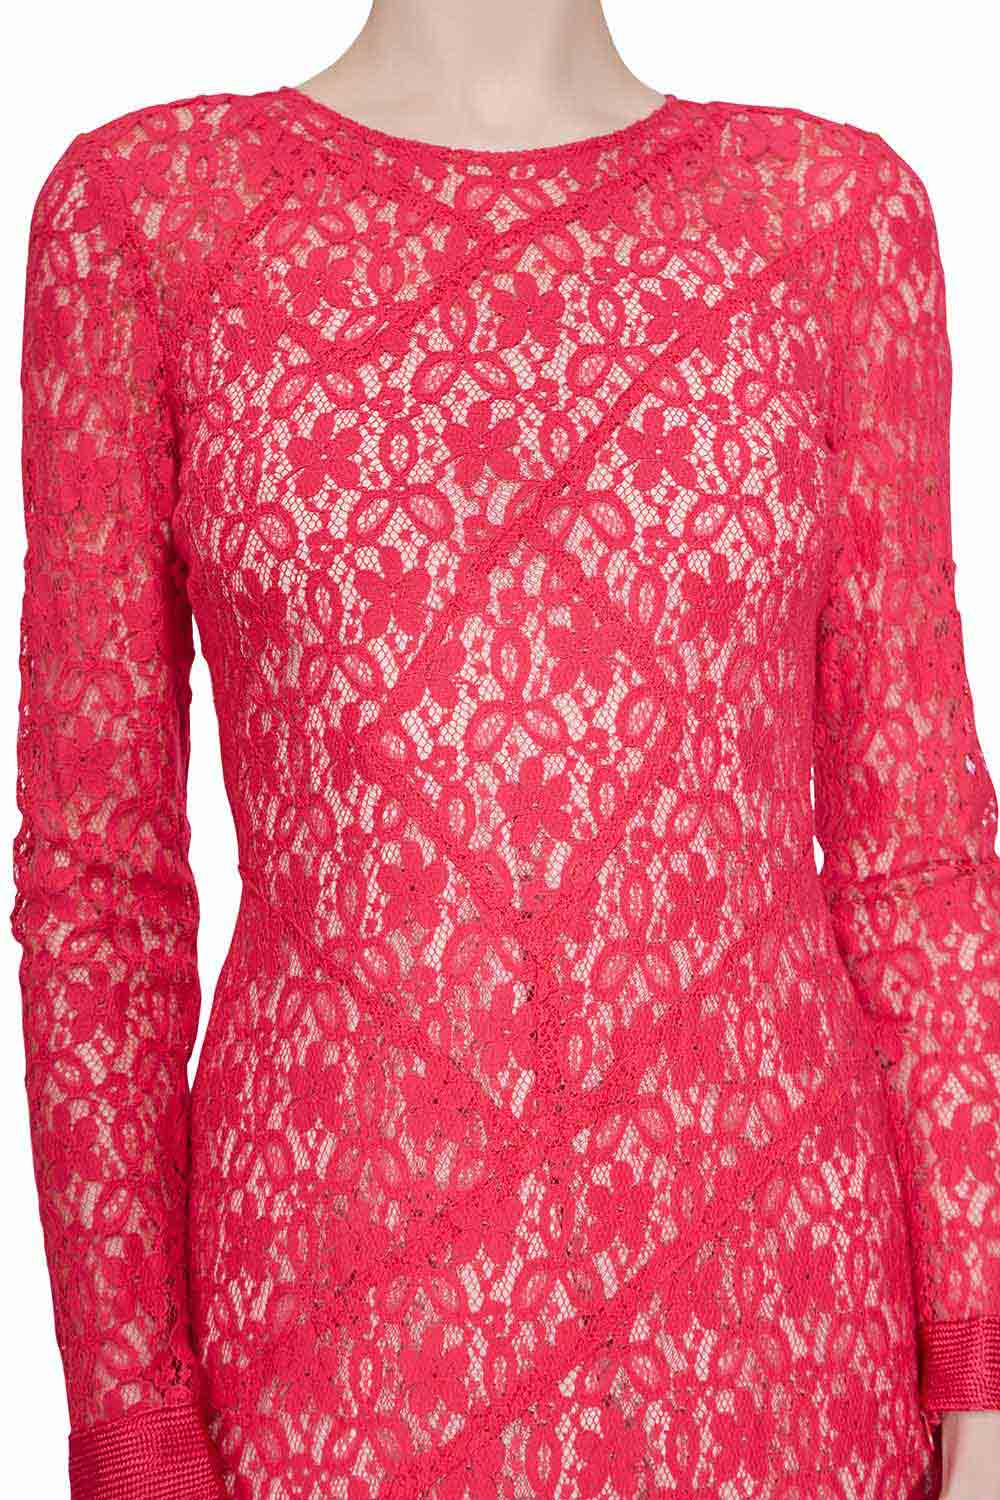 Marc By Marc Jacobs Strawberry Daiquiri Floral Lace Paneled Leila Dress S